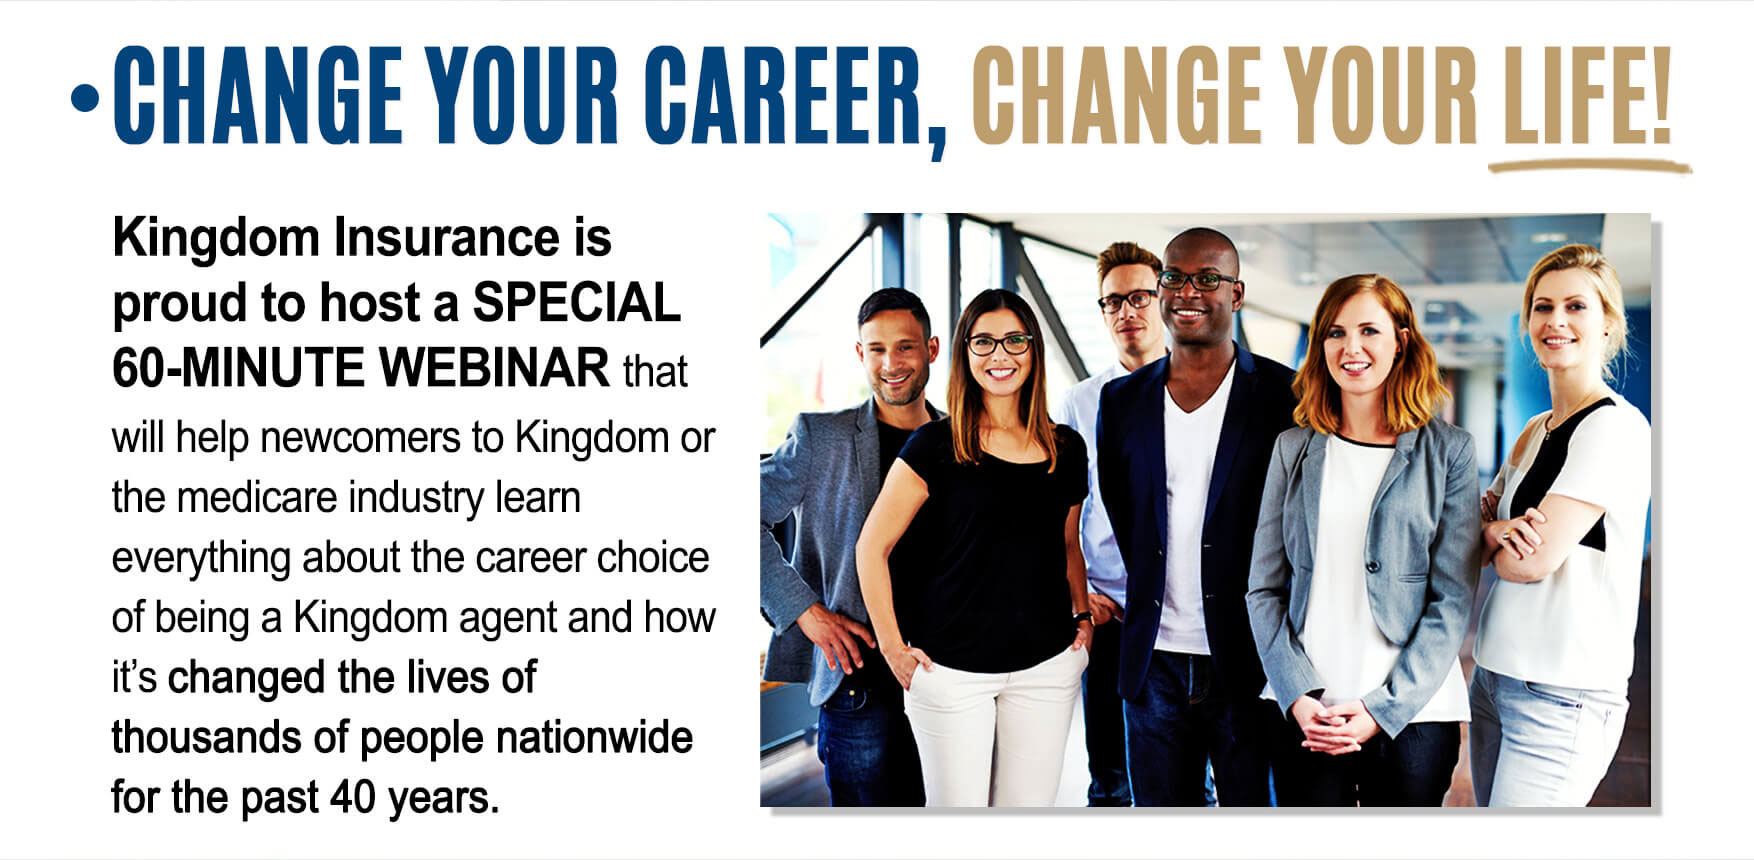 Change your career, change your life!